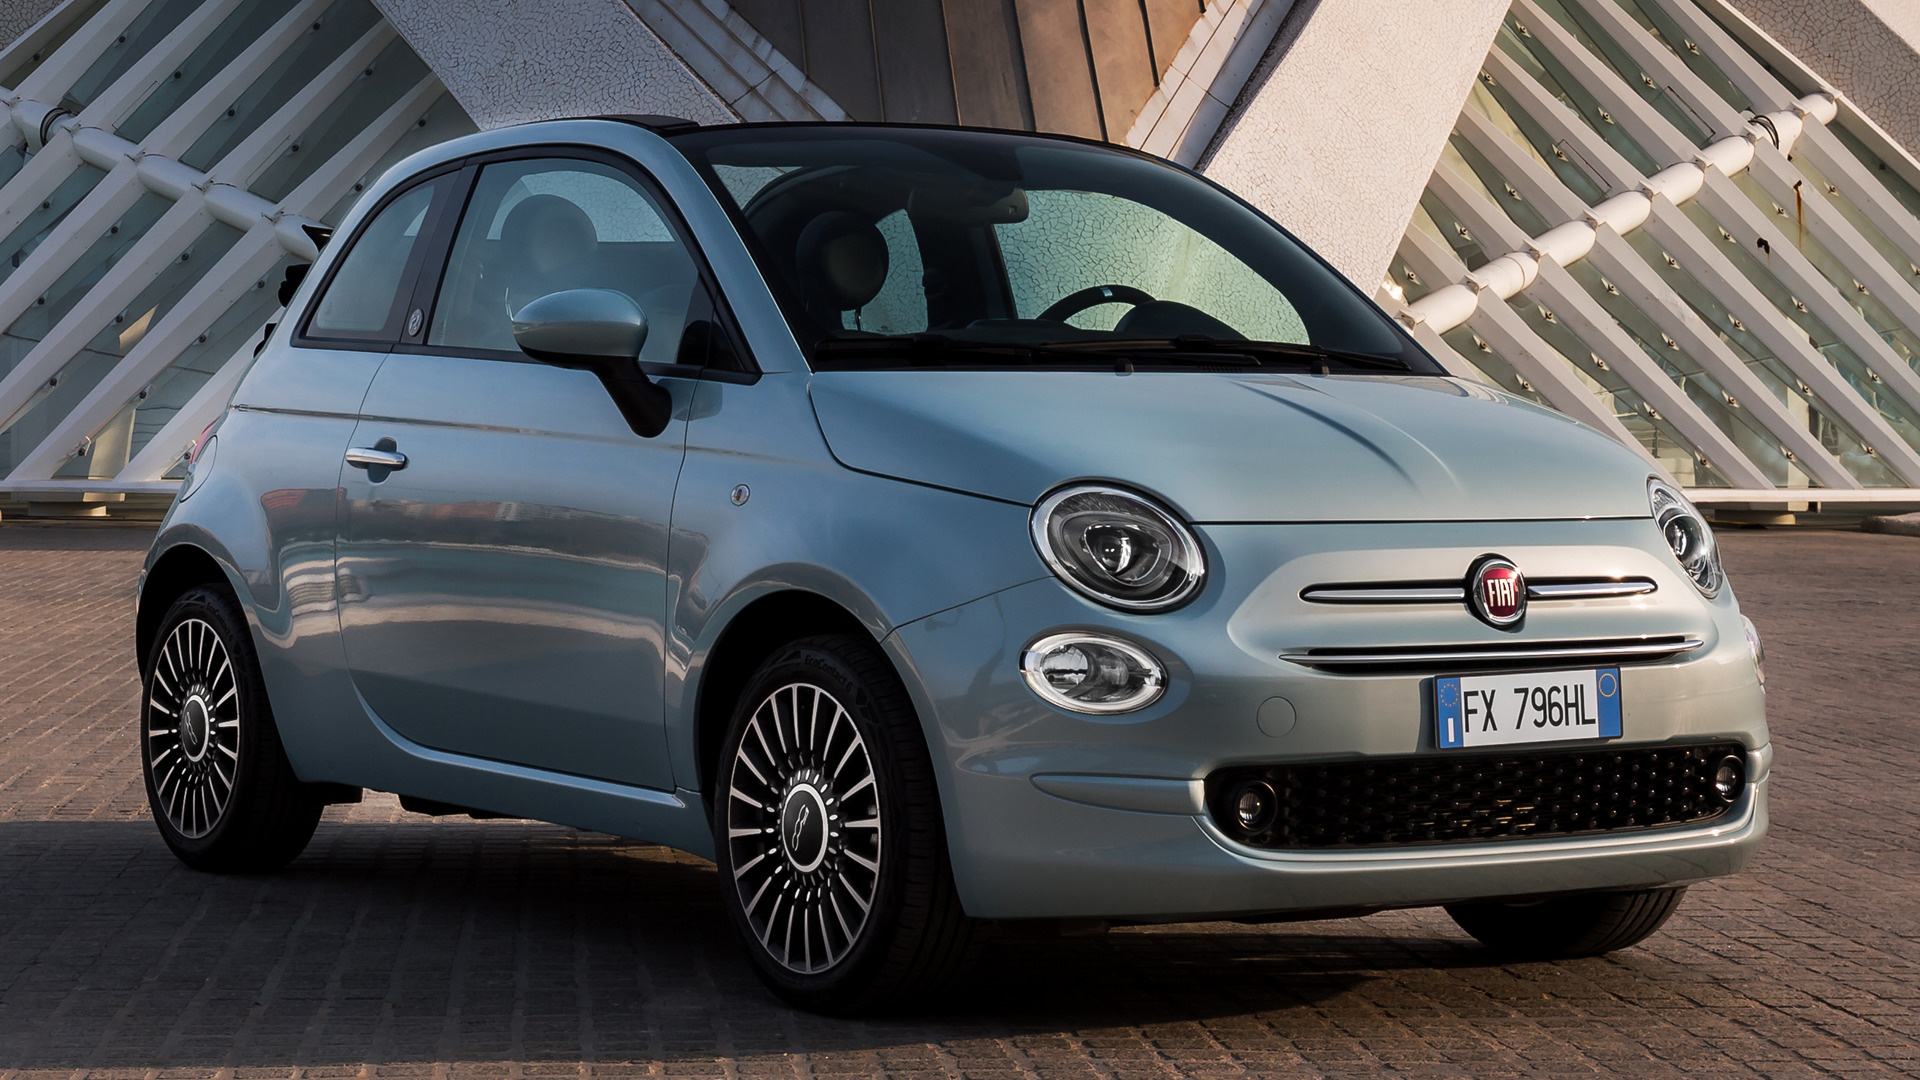 Vehicles Fiat 500 HD Wallpaper | Background Image